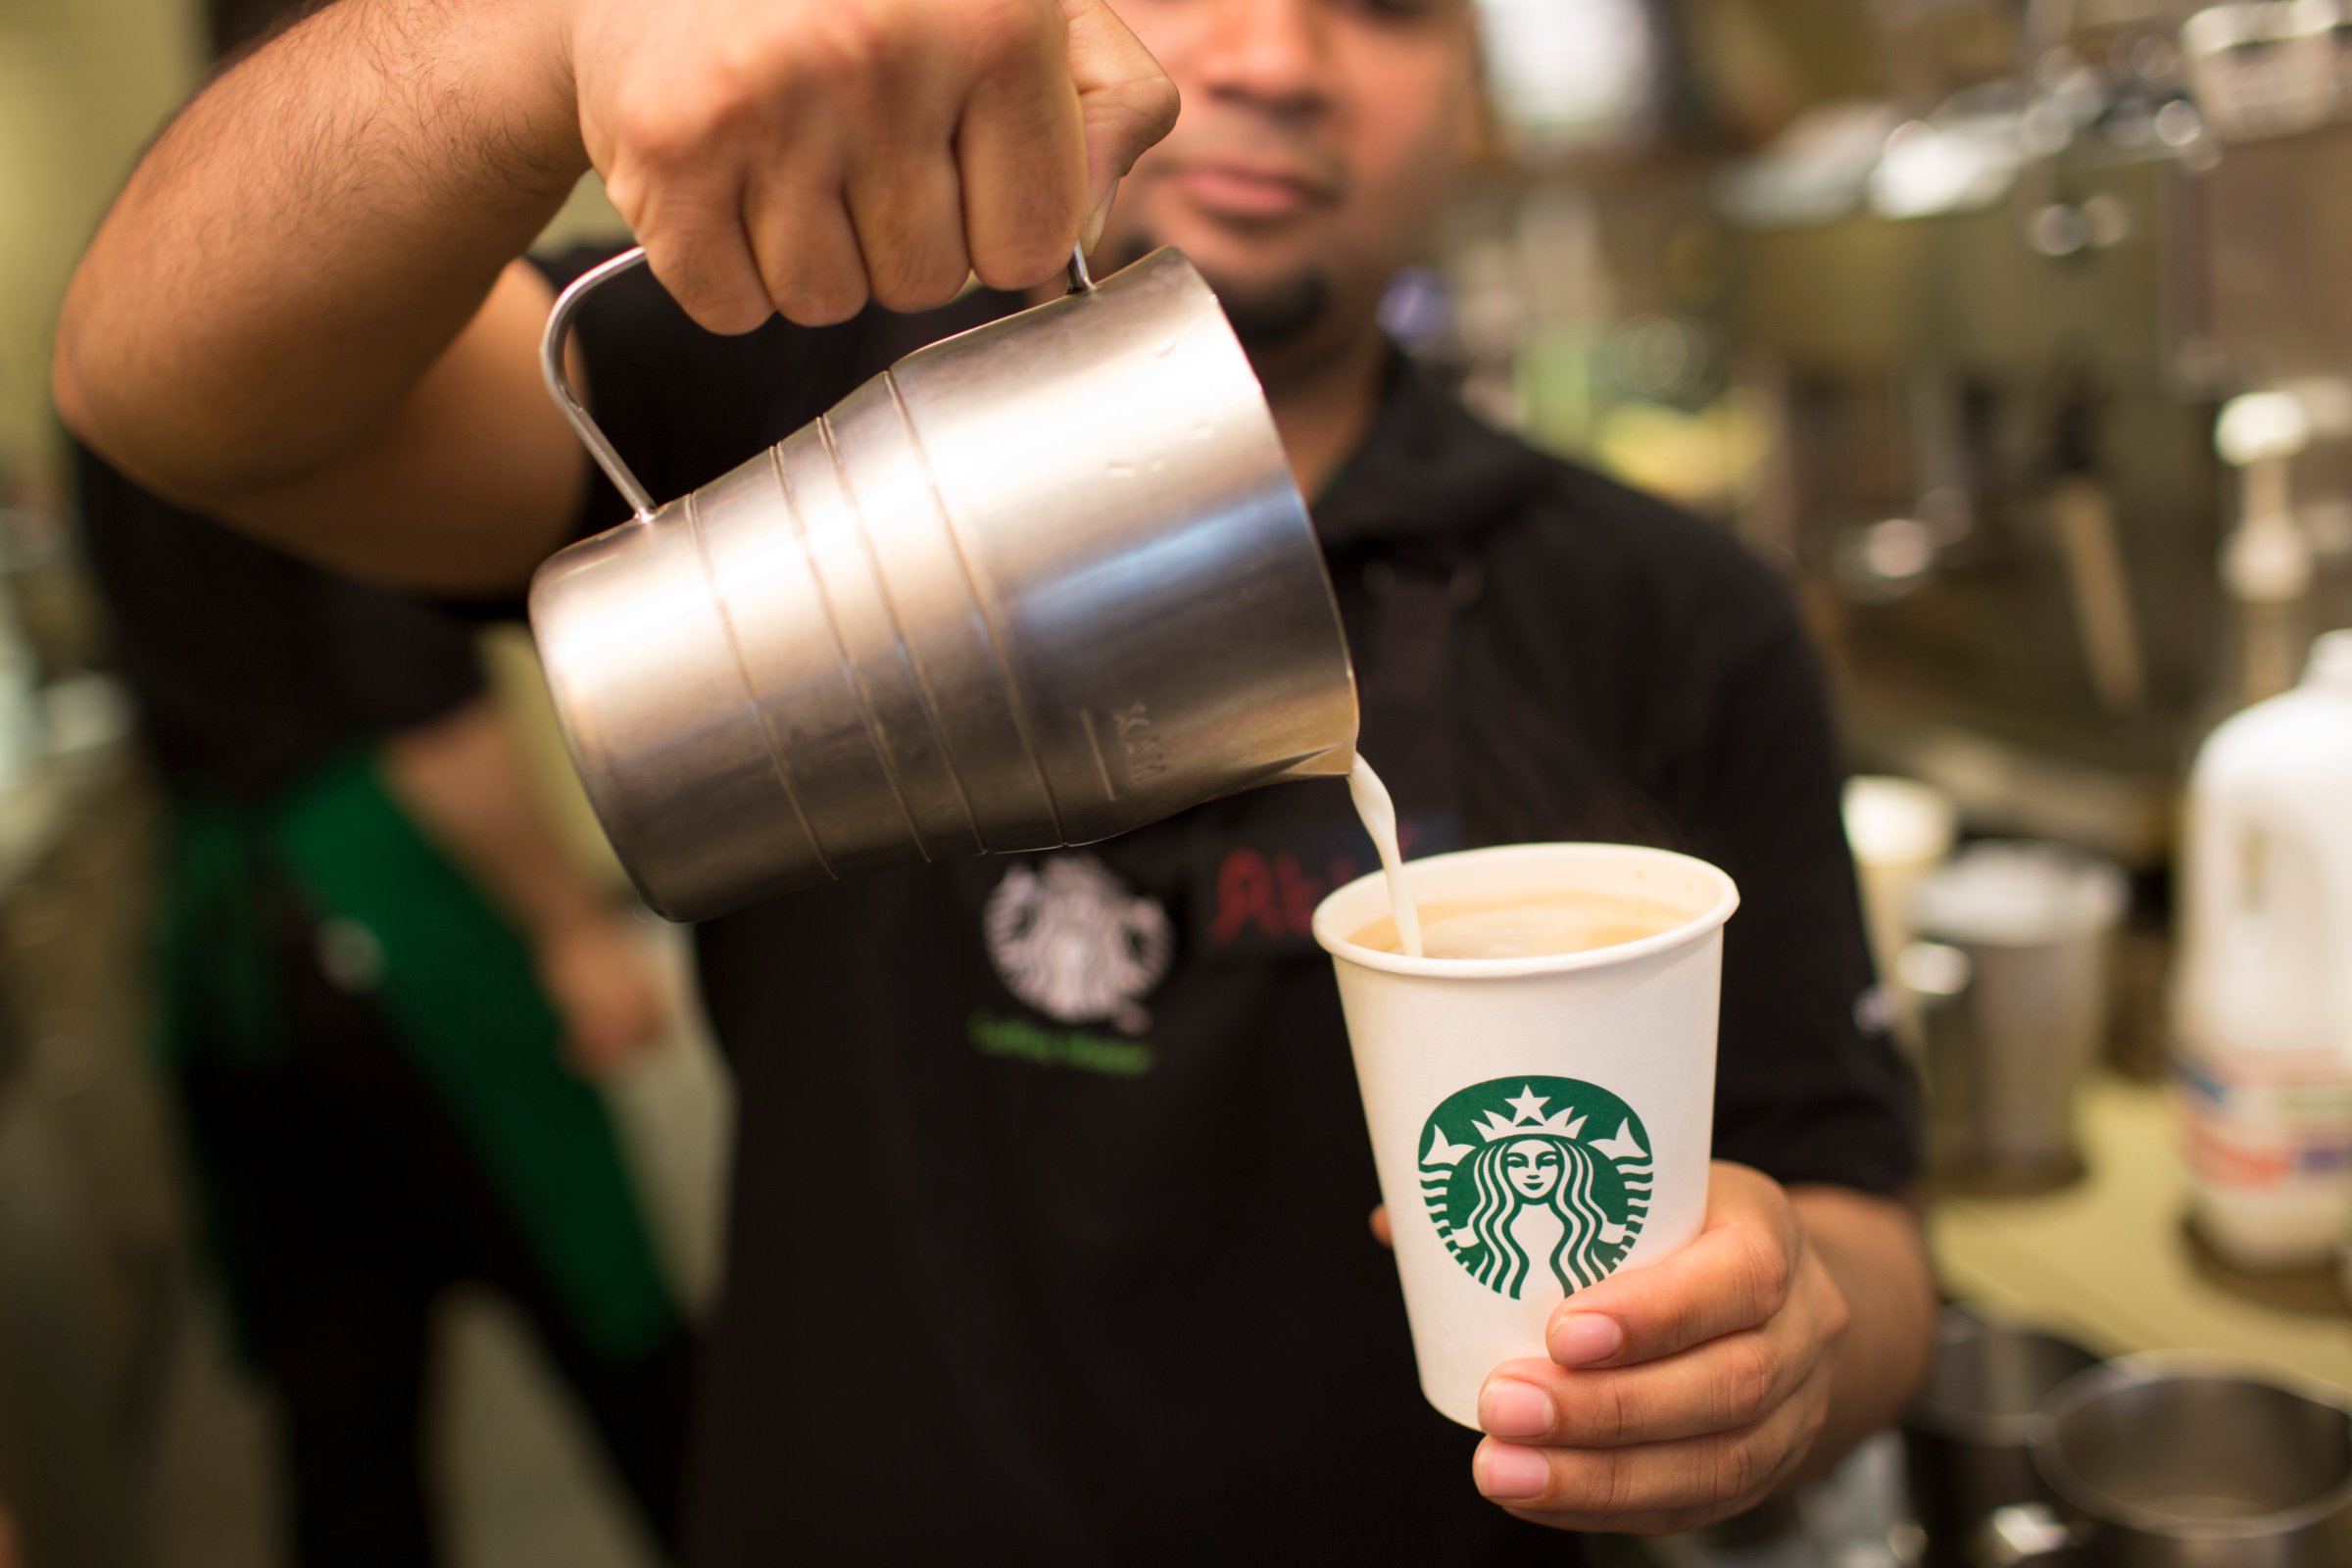 An employee pours milk into a cardboard coffee cup inside a Starbucks Corp. coffee shop in London on June 9, 2014.